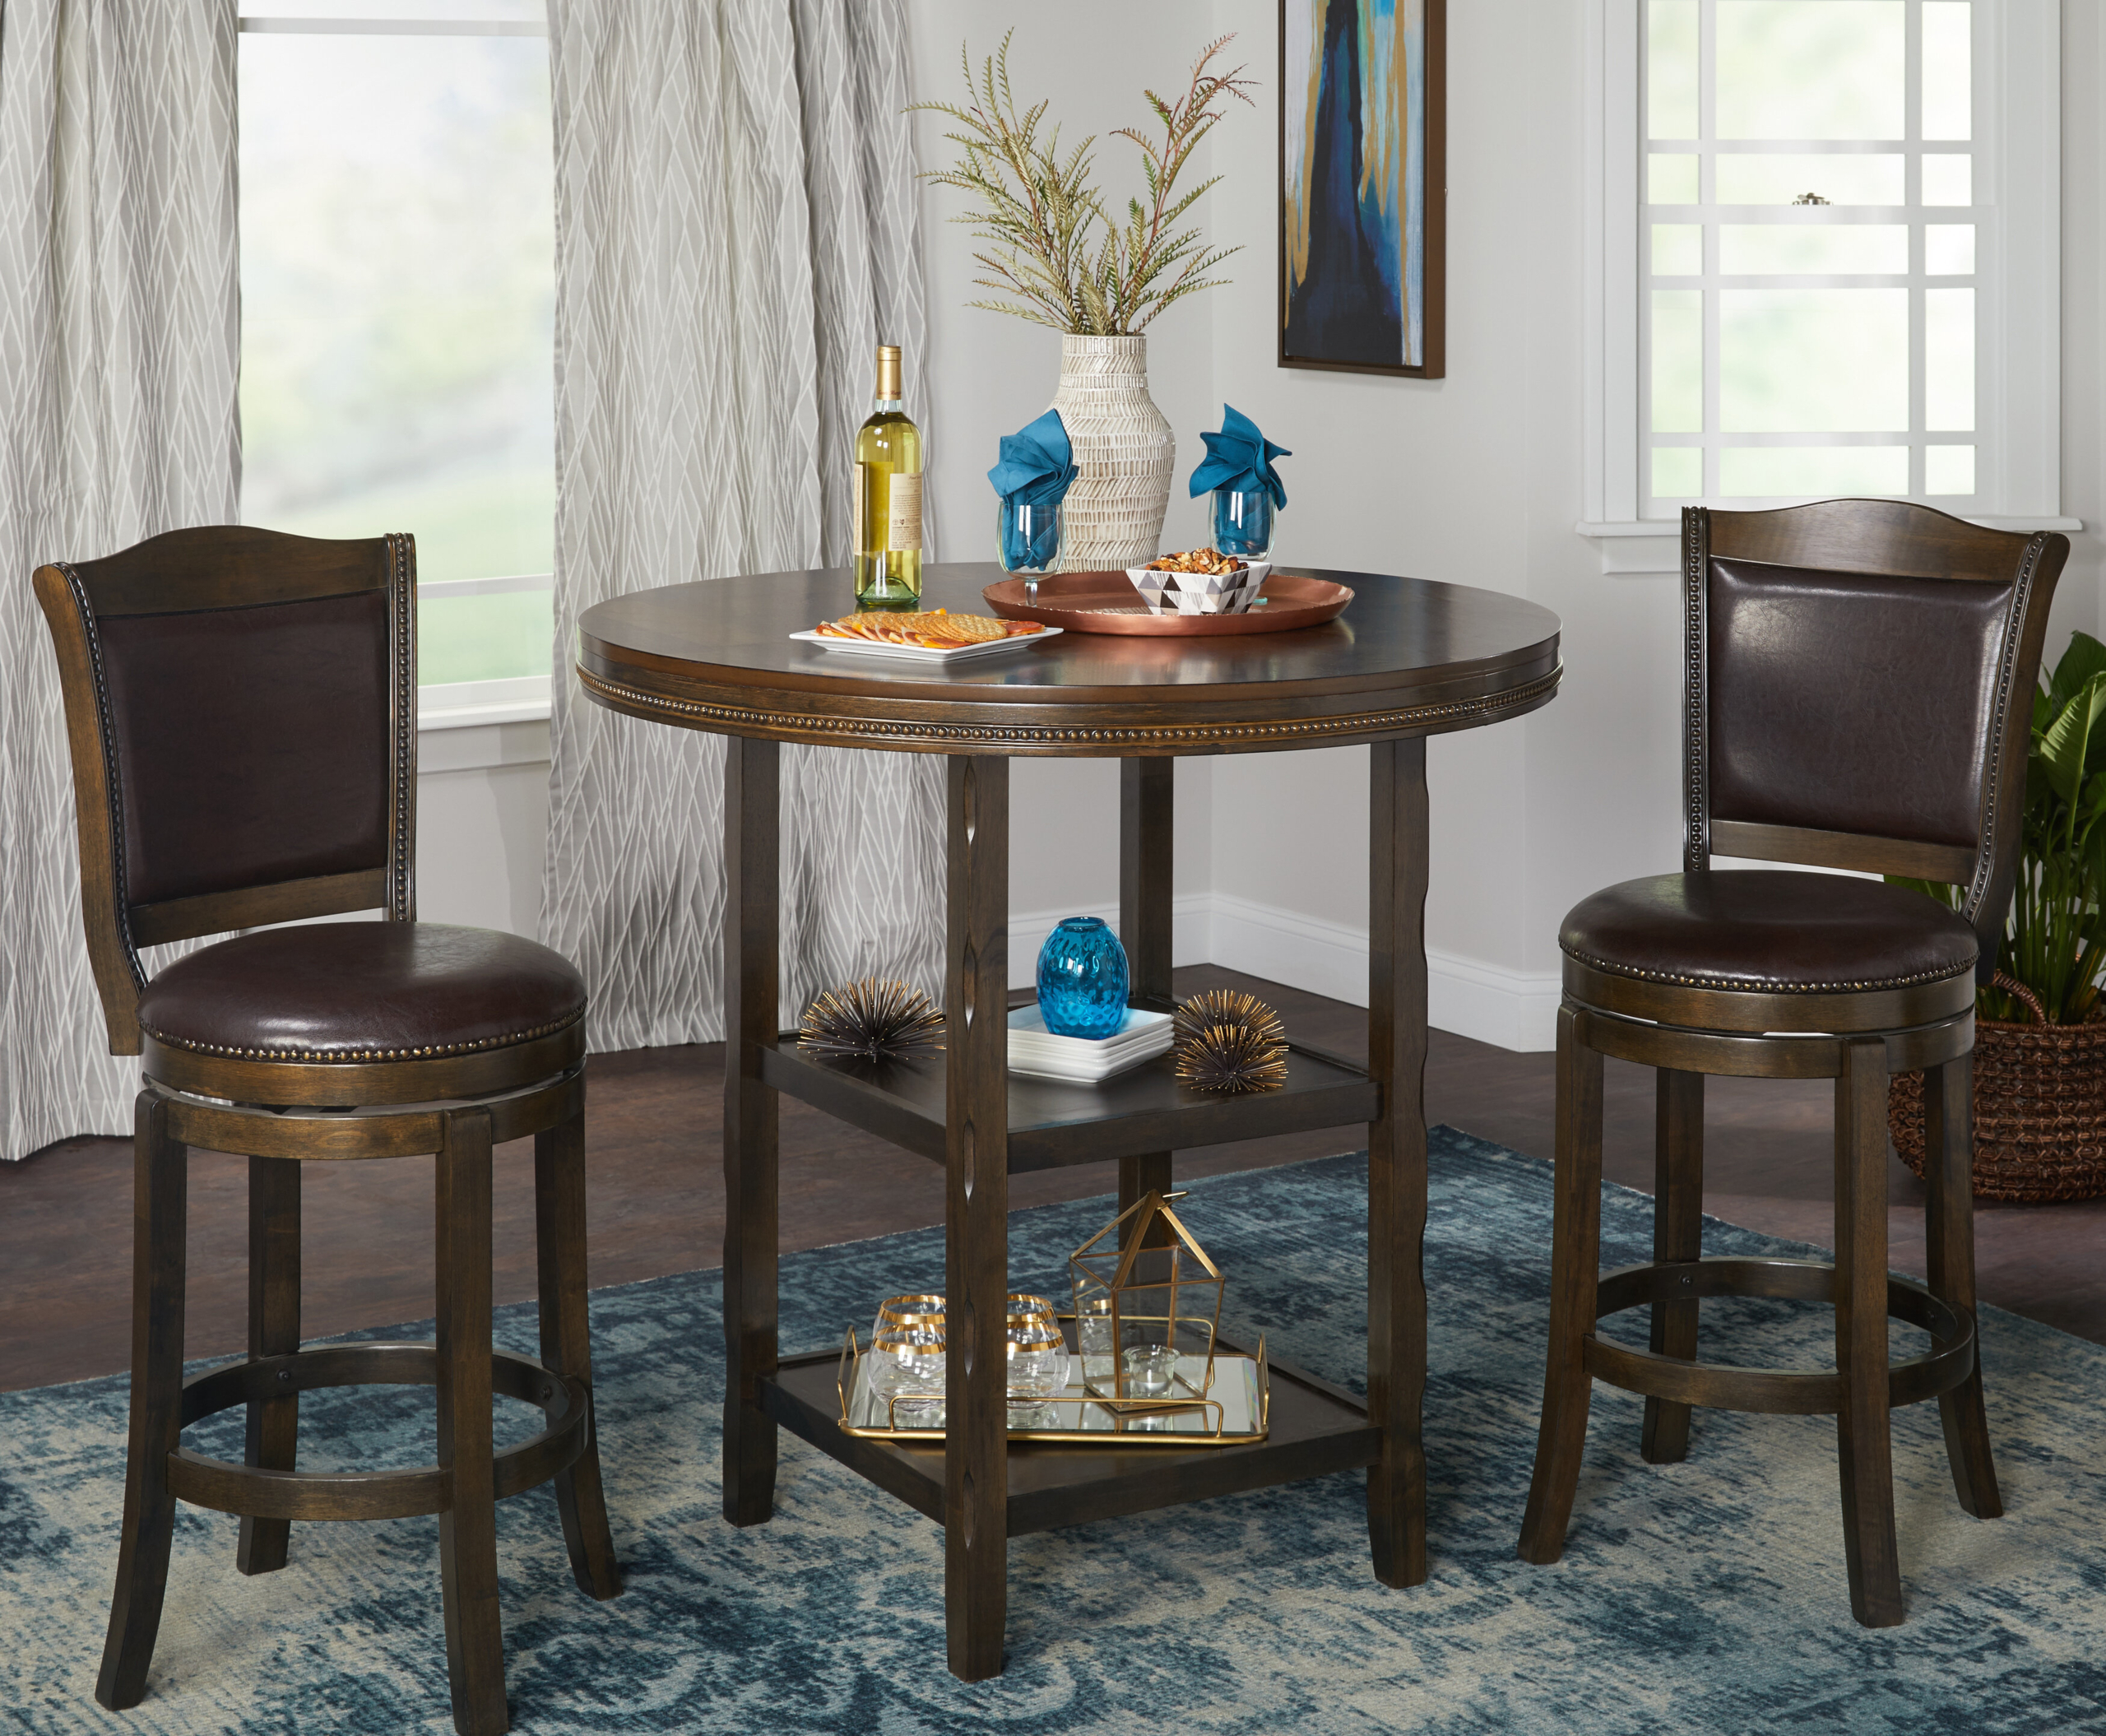 3 Piece Pub Table Set Visualhunt, Round Pub Table With 6 Chairs